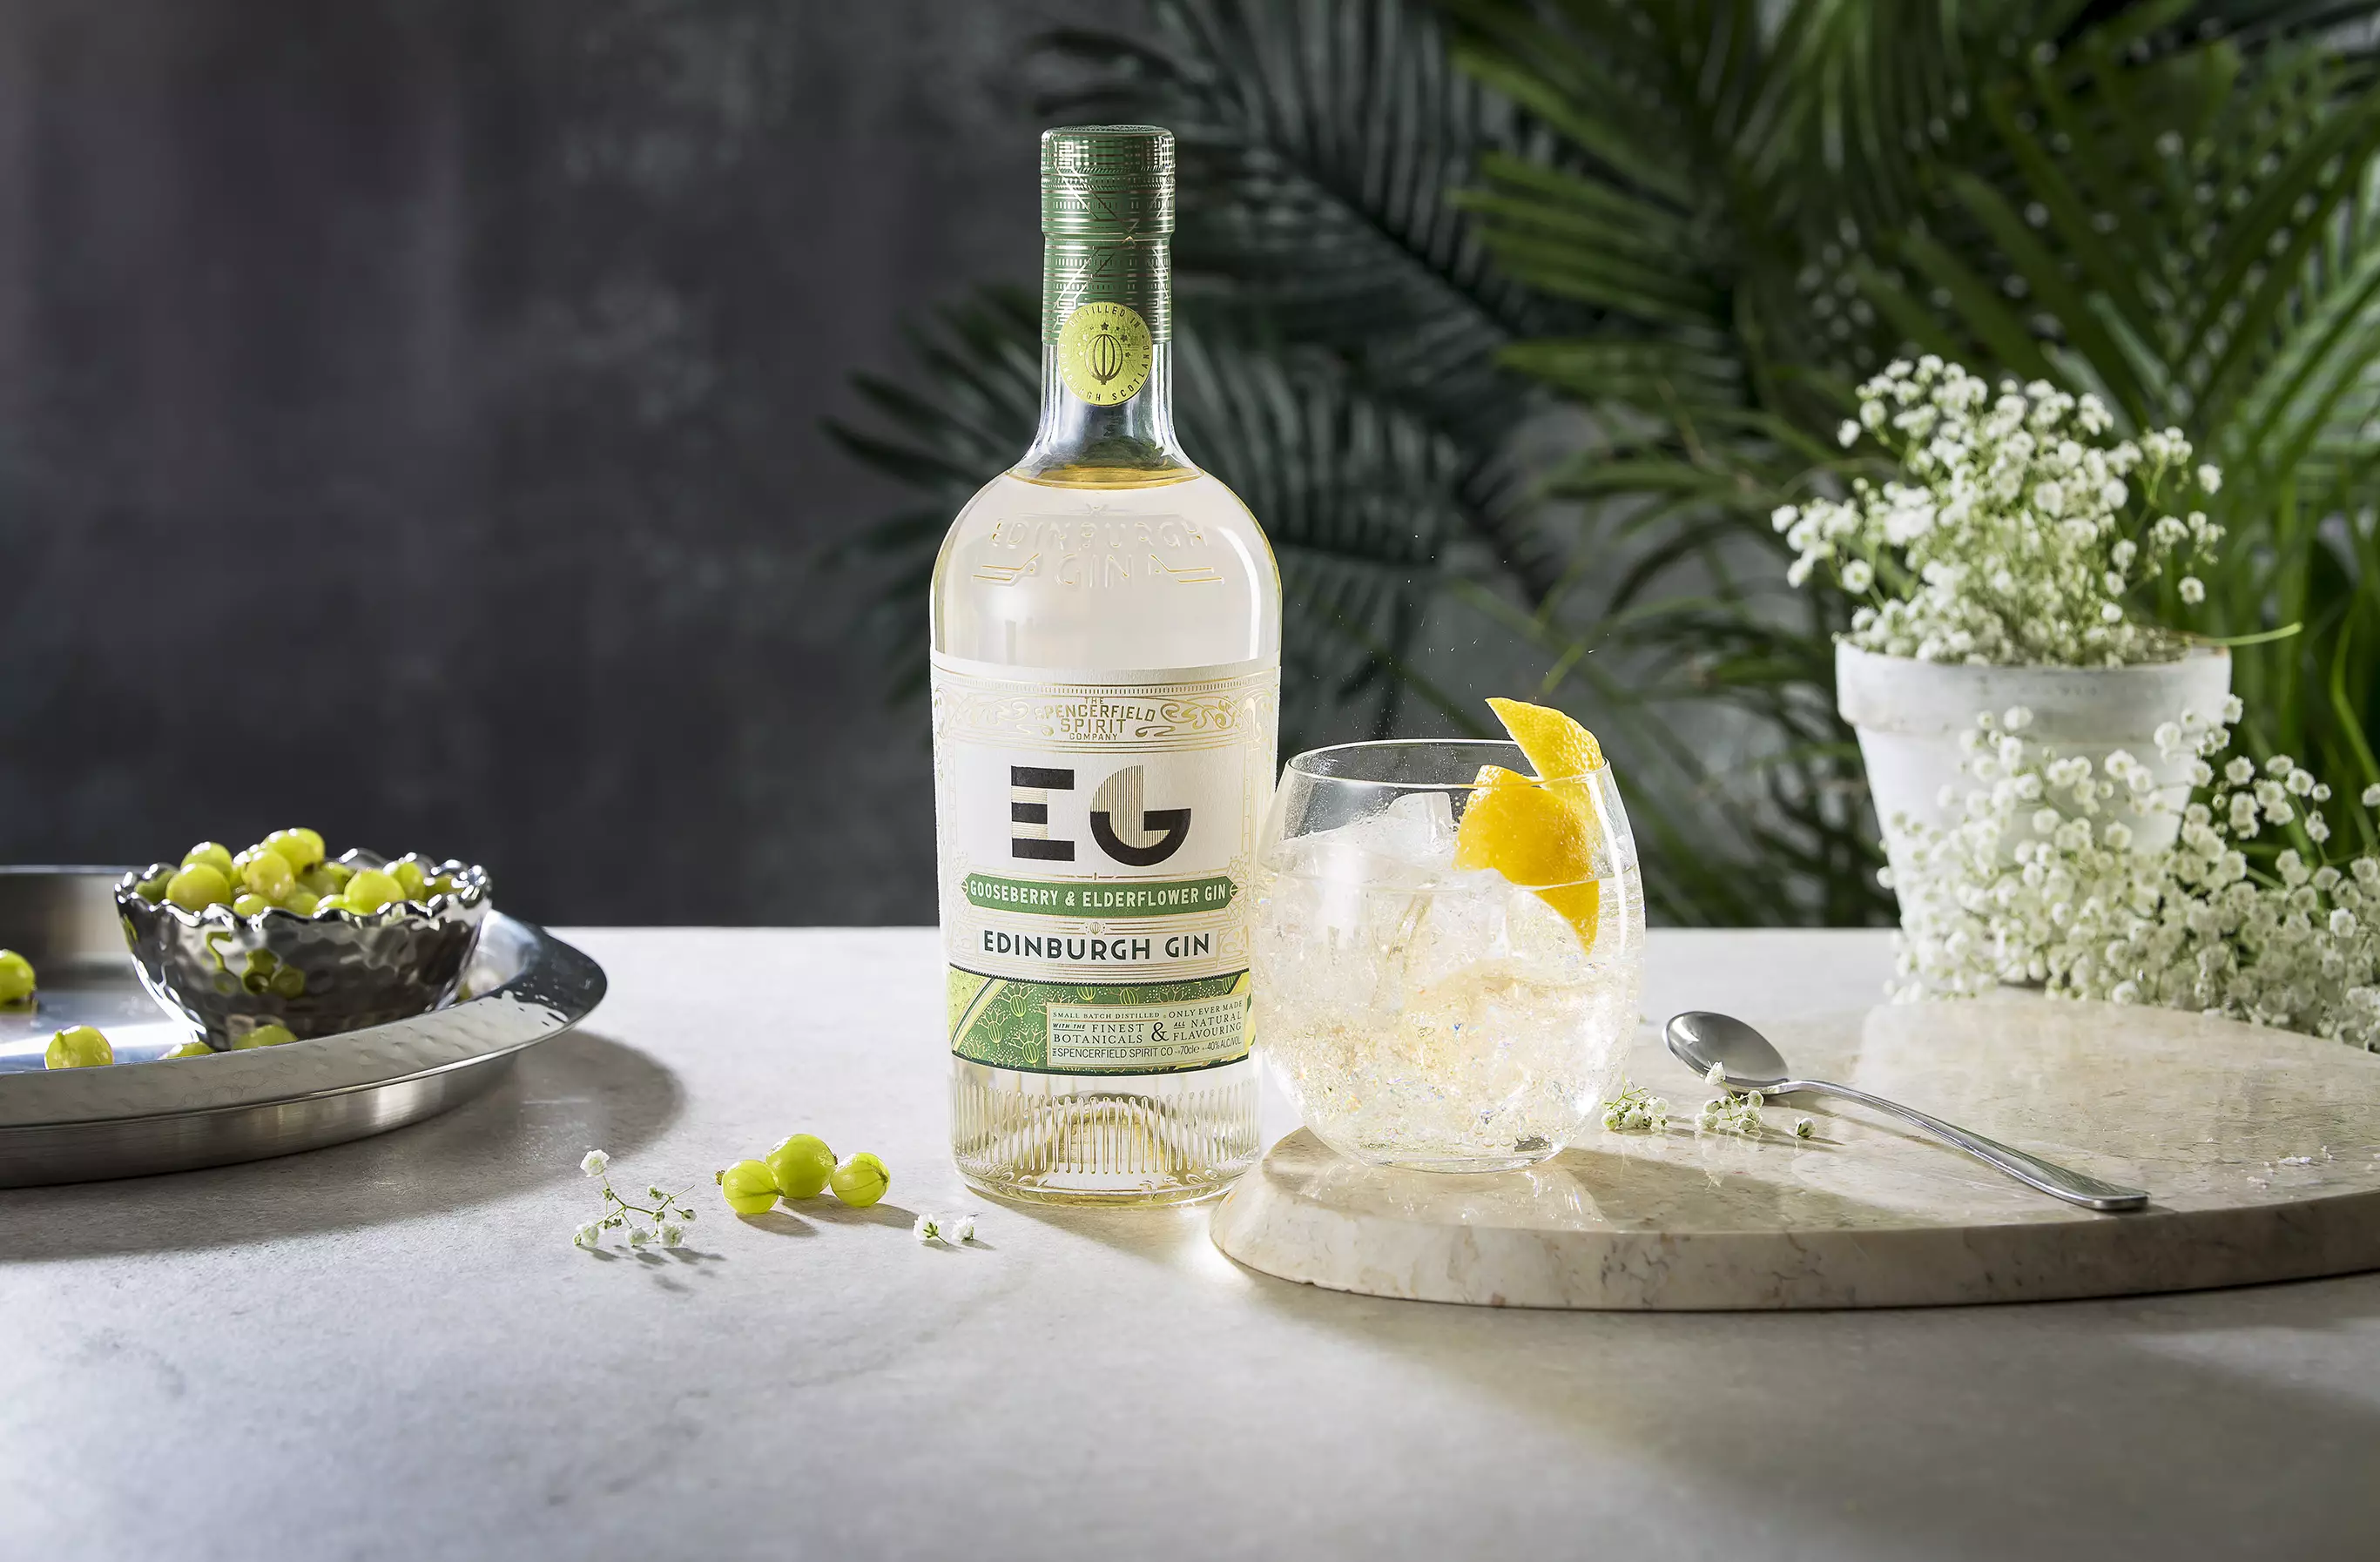 The gooseberry and elderflower gin is 40 per cent ABV (